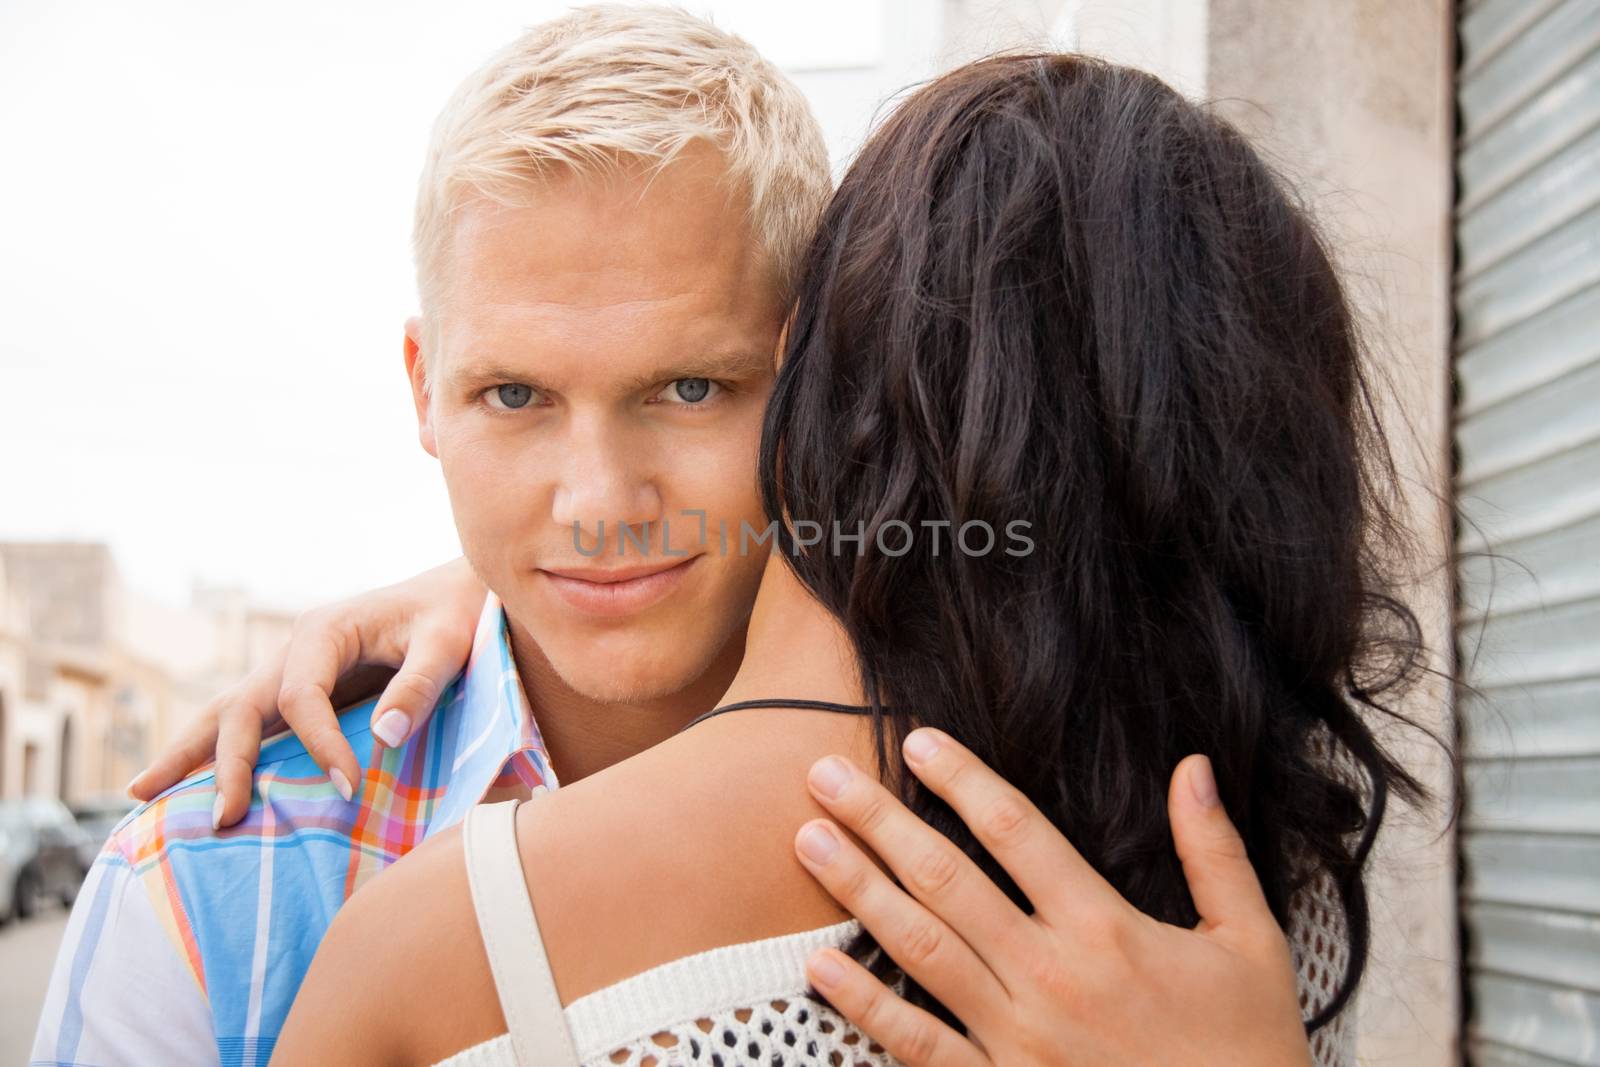 Romantic handsome young blond man hugging his girlfriend looking past the side of her head at the camera with a smile